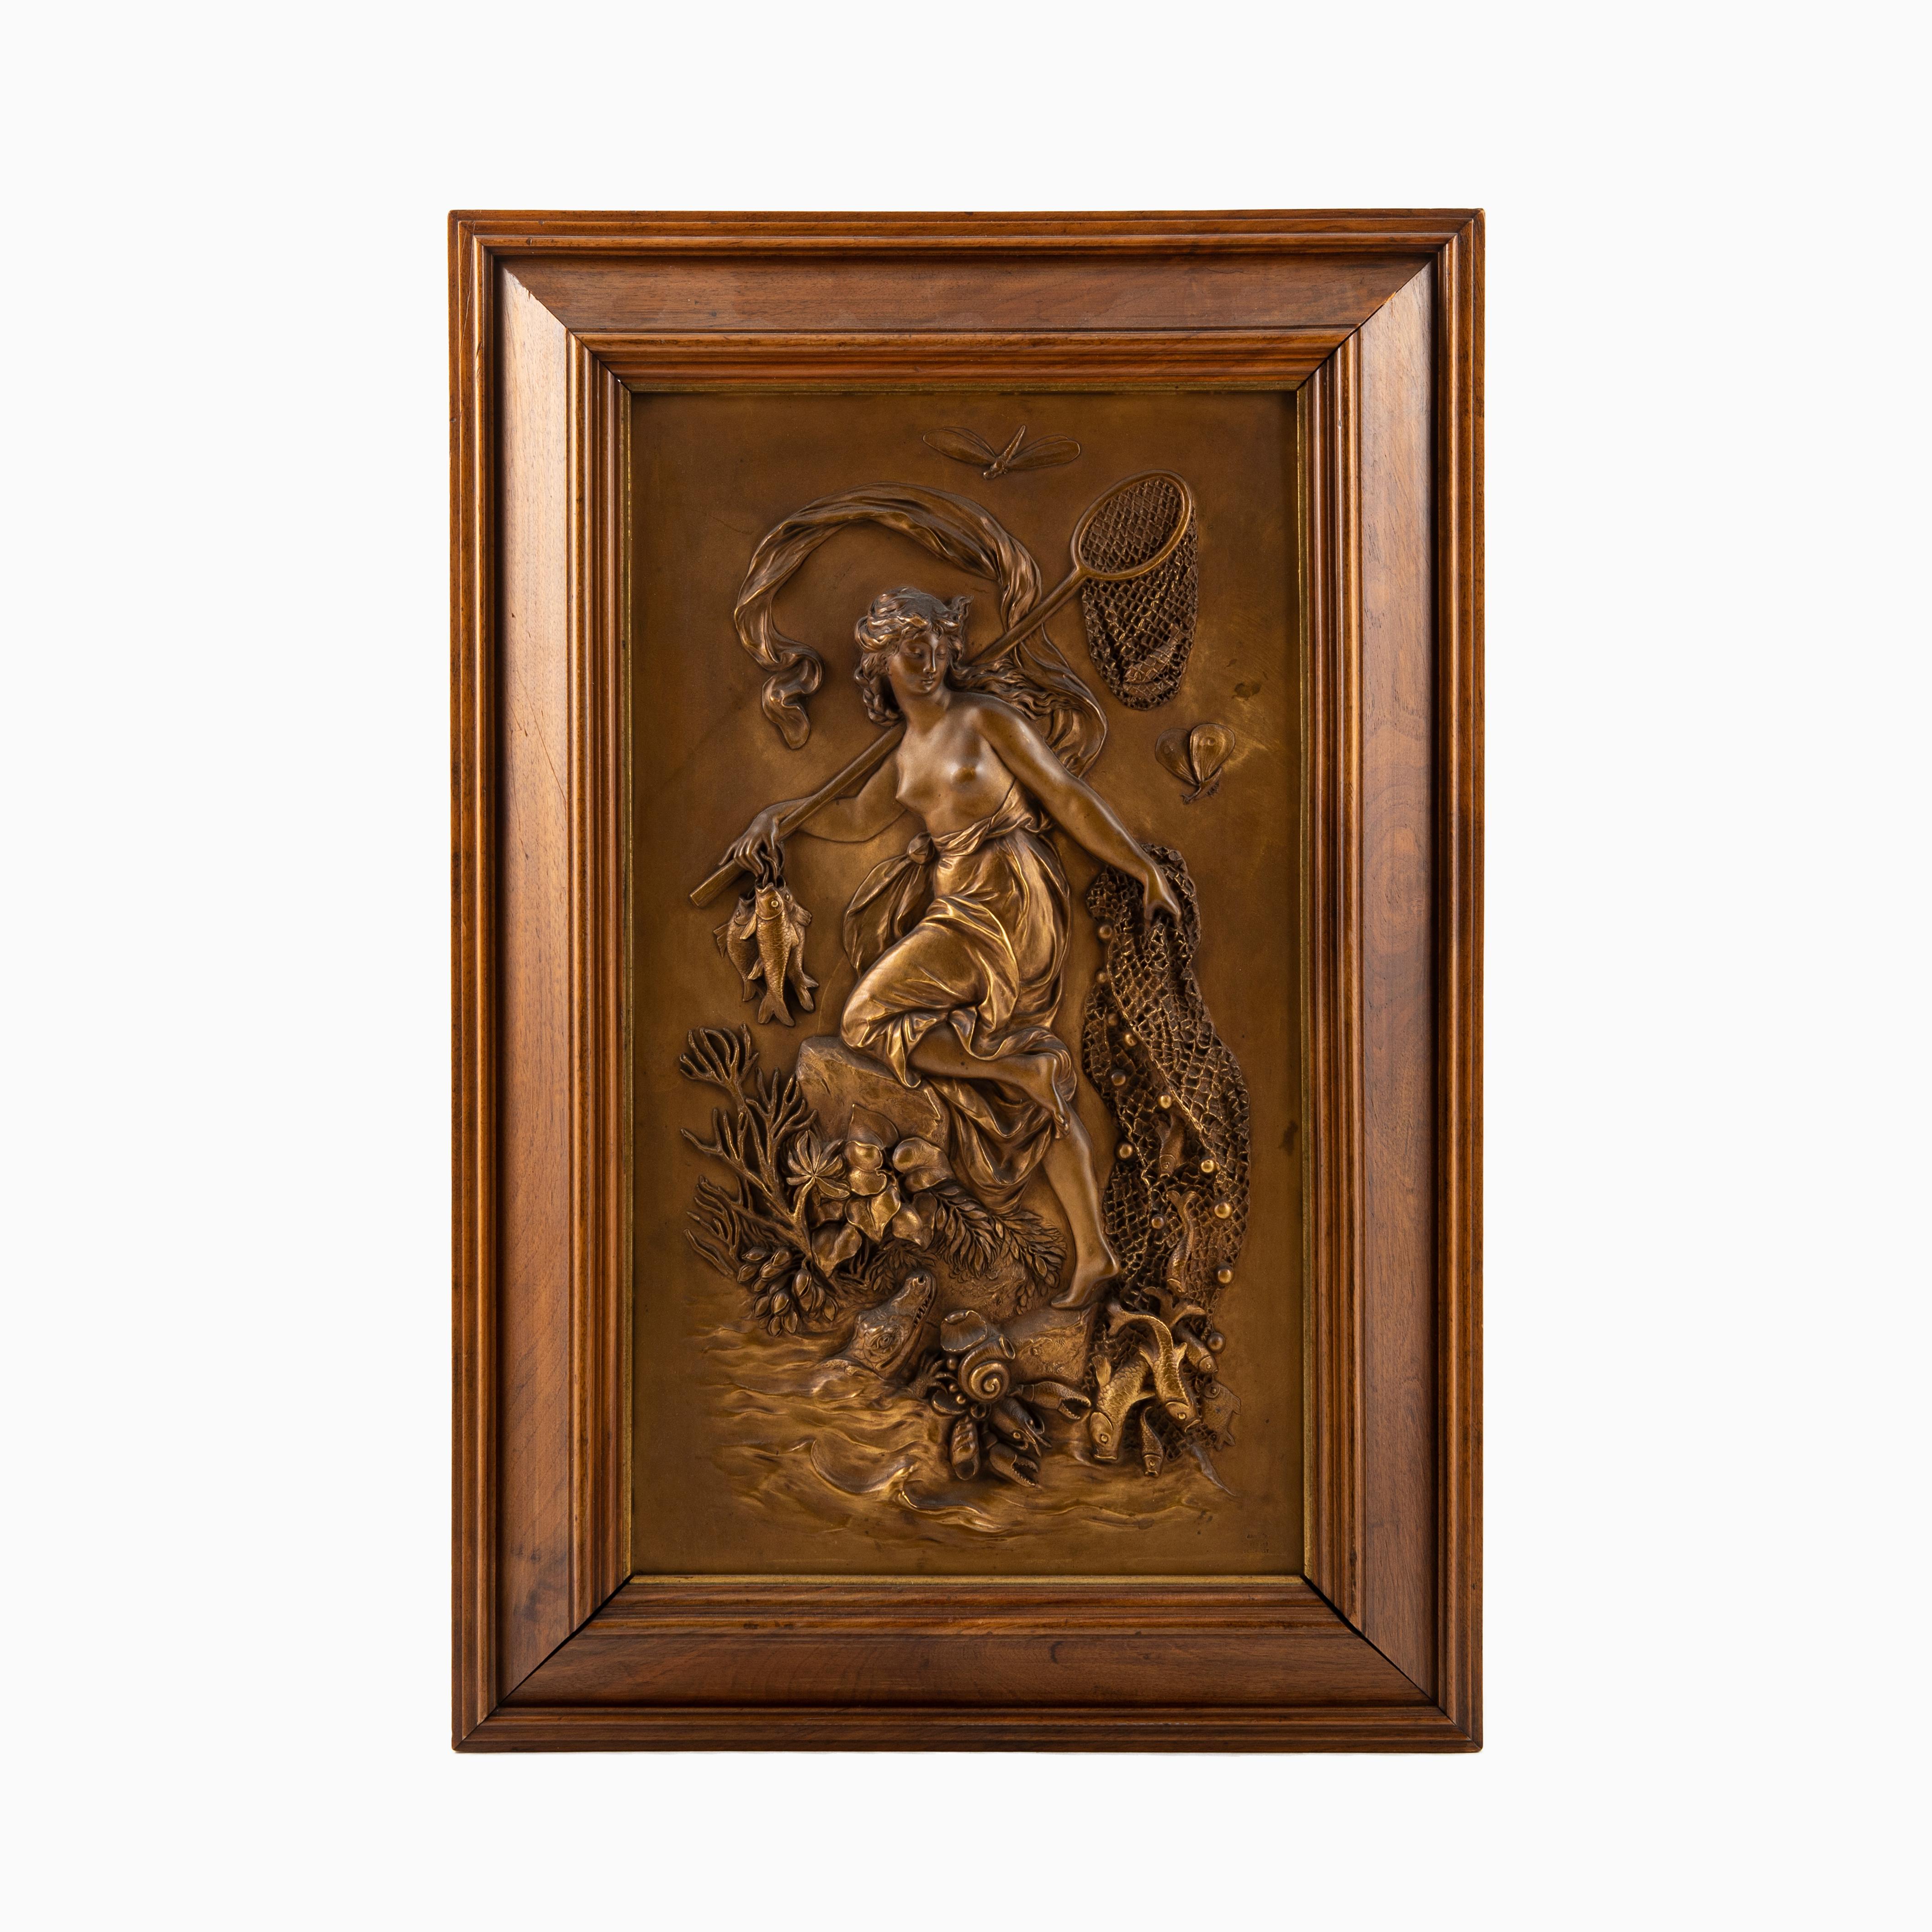 Pair of fine Art Nouveau / Jugendstyl gilt bronze relief wall plaques, with wonderful details, mounted in walnut frames.

The reliefs depict Diana, the Roman goddess of the hunt, unspoiled nature and the moon, as well as a depiction of an allegory